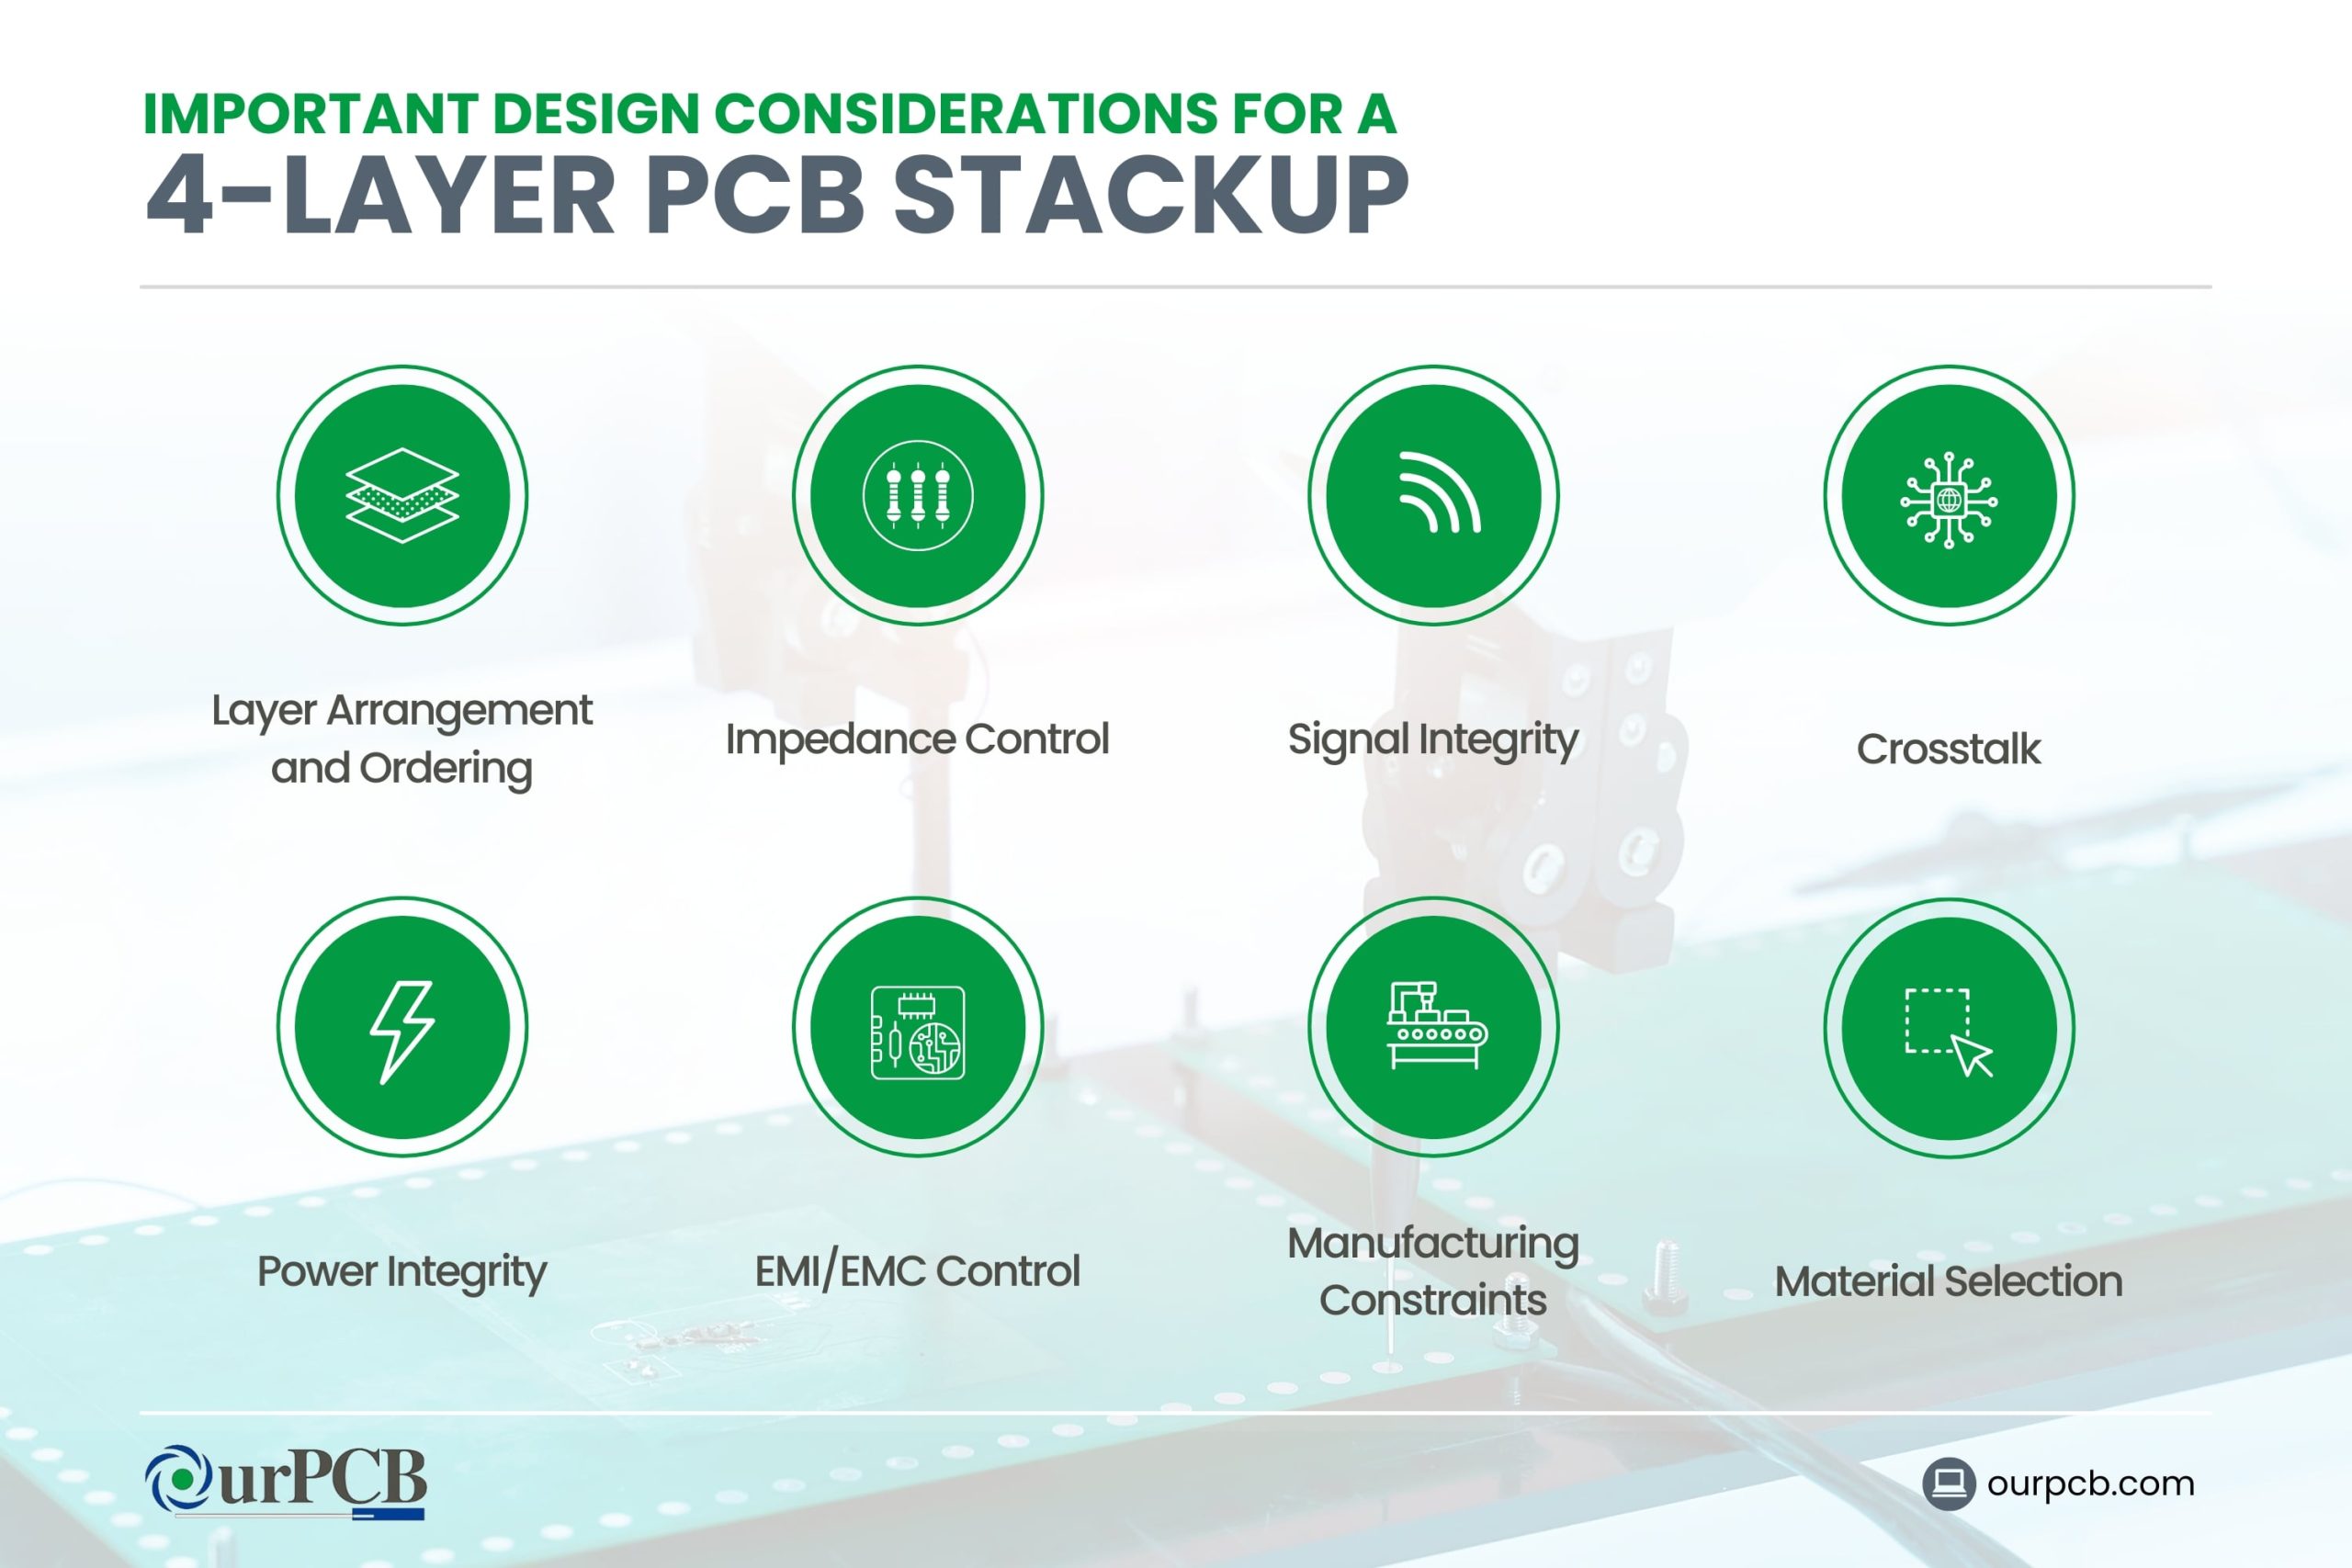 What Are the Important Design Considerations for a 4-Layer PCB Stackup?